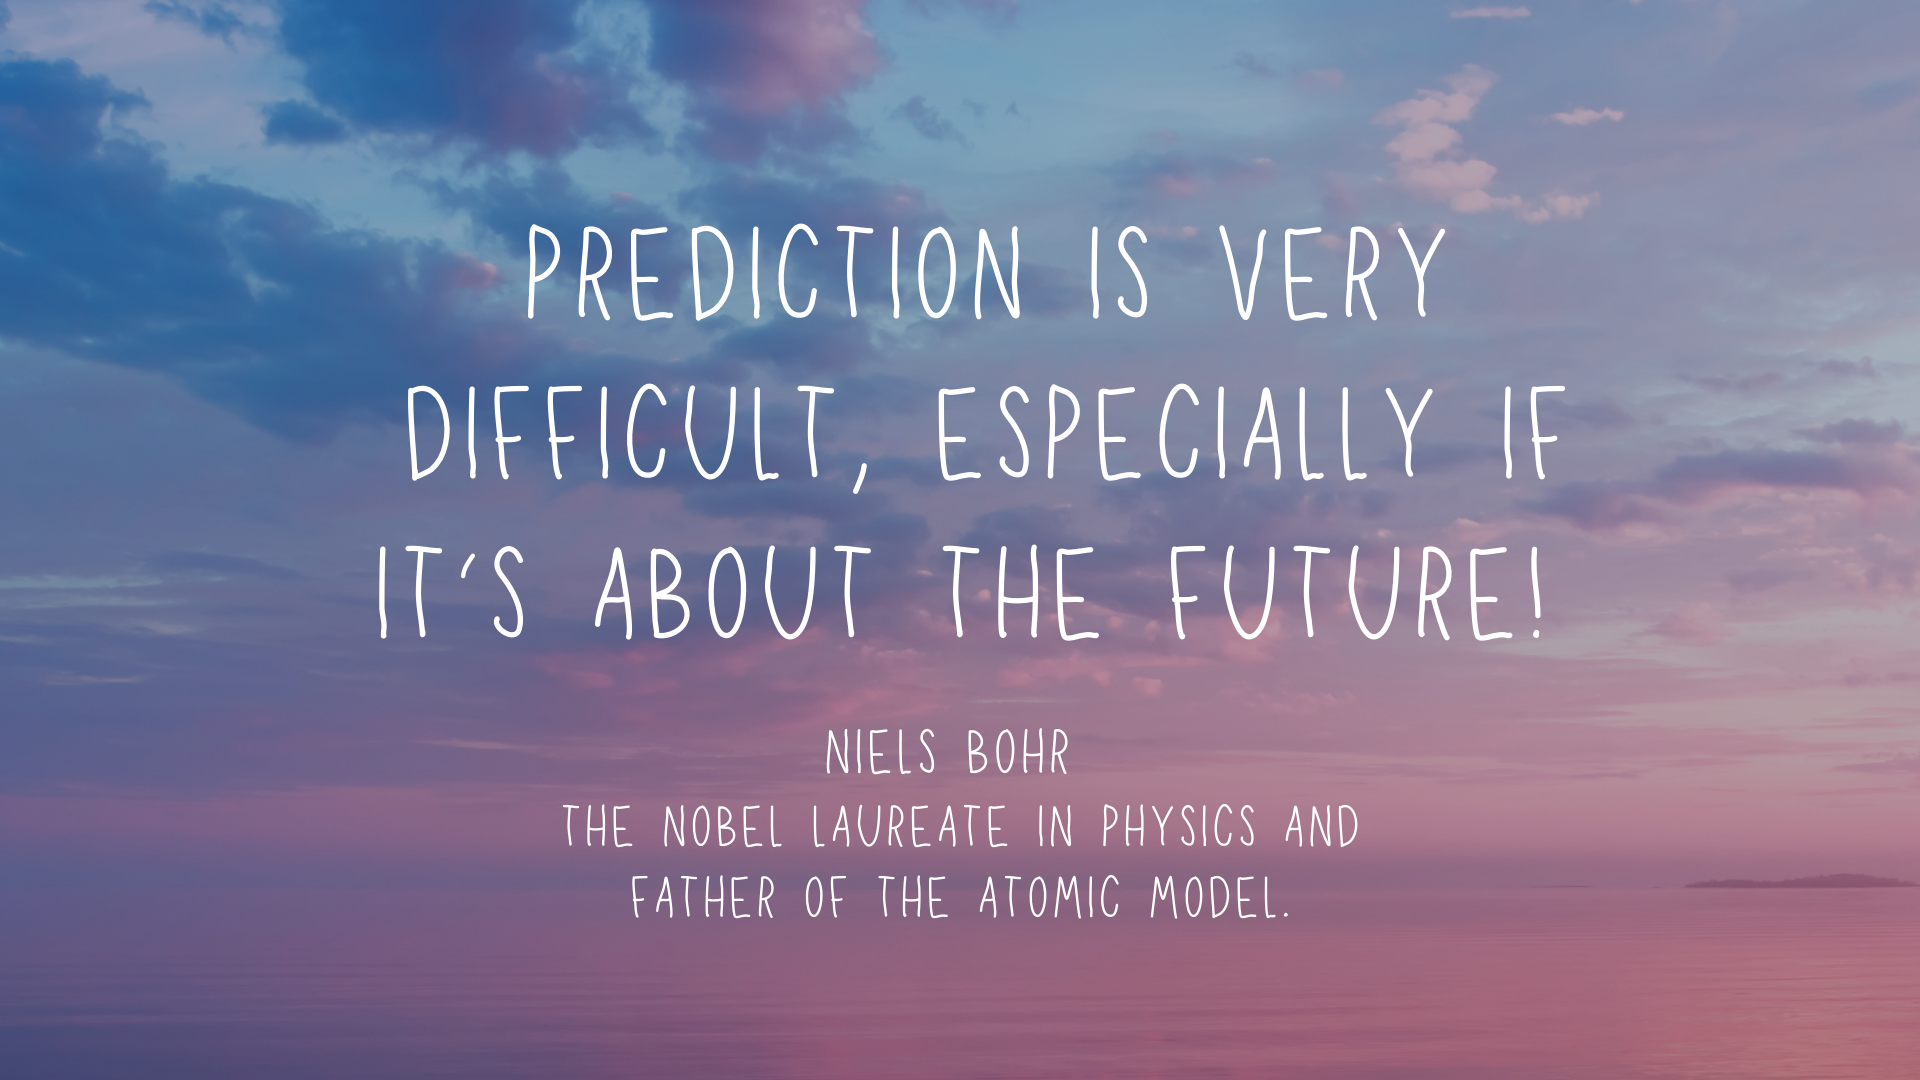 Prediction is very difficult, especially if it’s about the future! – Niels Bohr, the Nobel laureate in Physics and father of the atomic model.